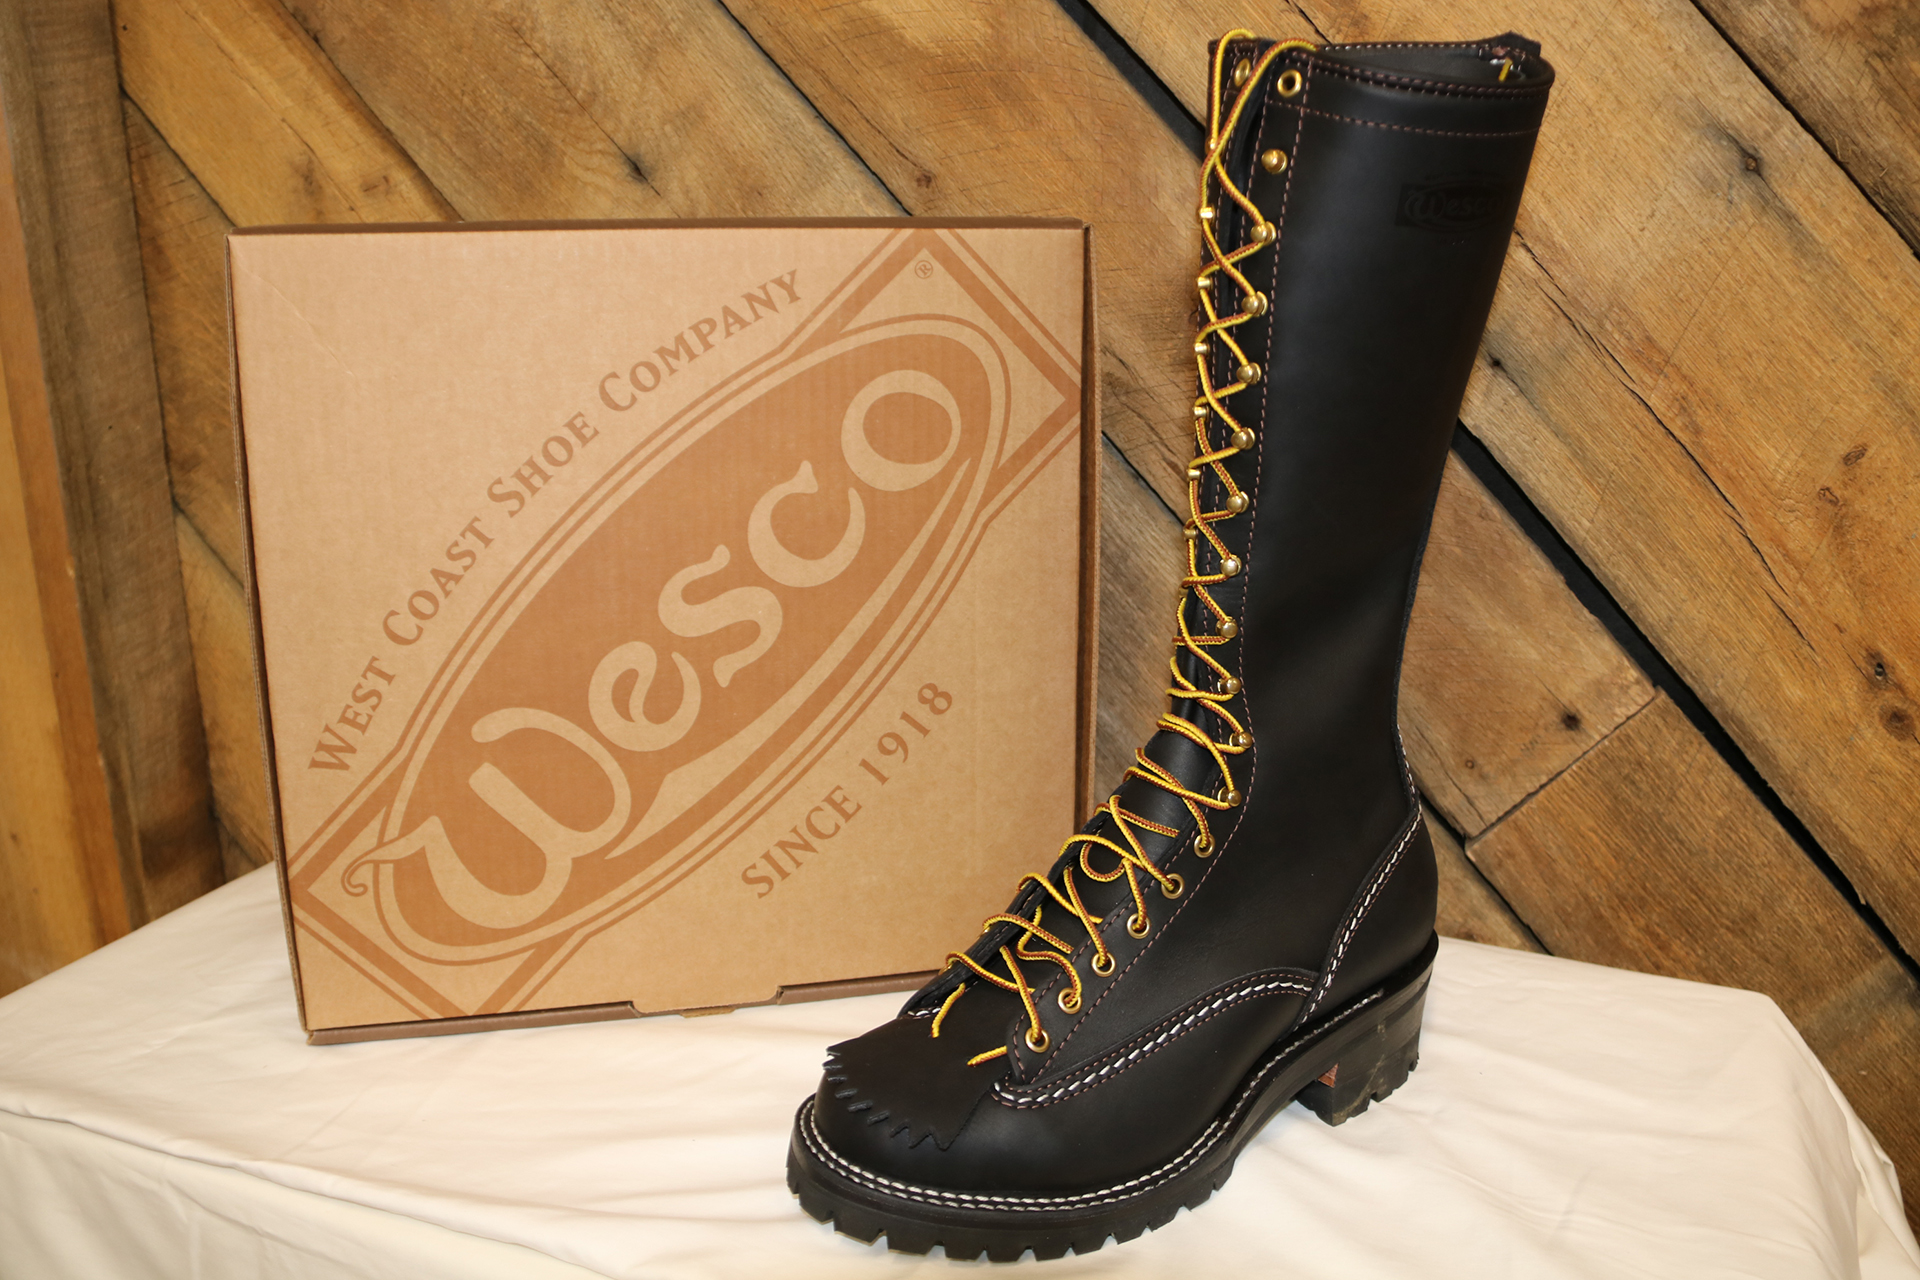 wesco timber boots